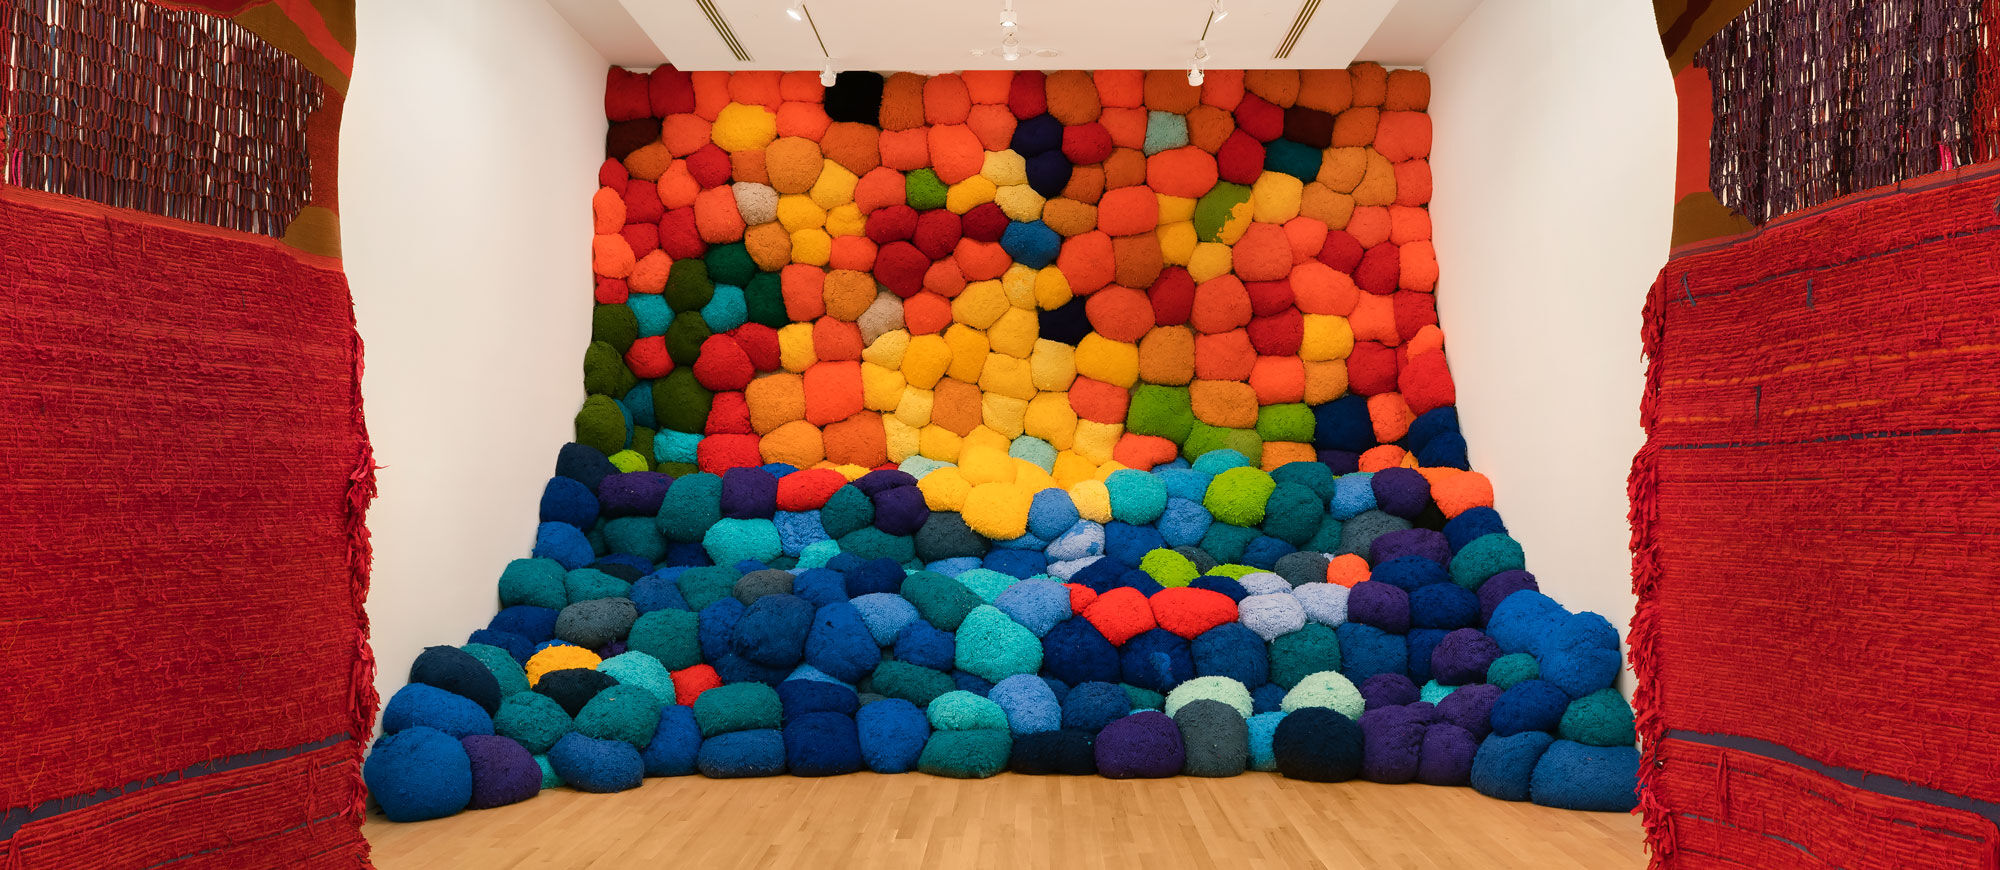 Installation view of Sheila Hicks, Escalade Beyond Chromatic Lands, 2016–17, at The Bass, 2019. Photo by Zachary Balber. Courtesy of The Bass, Miami Beach.